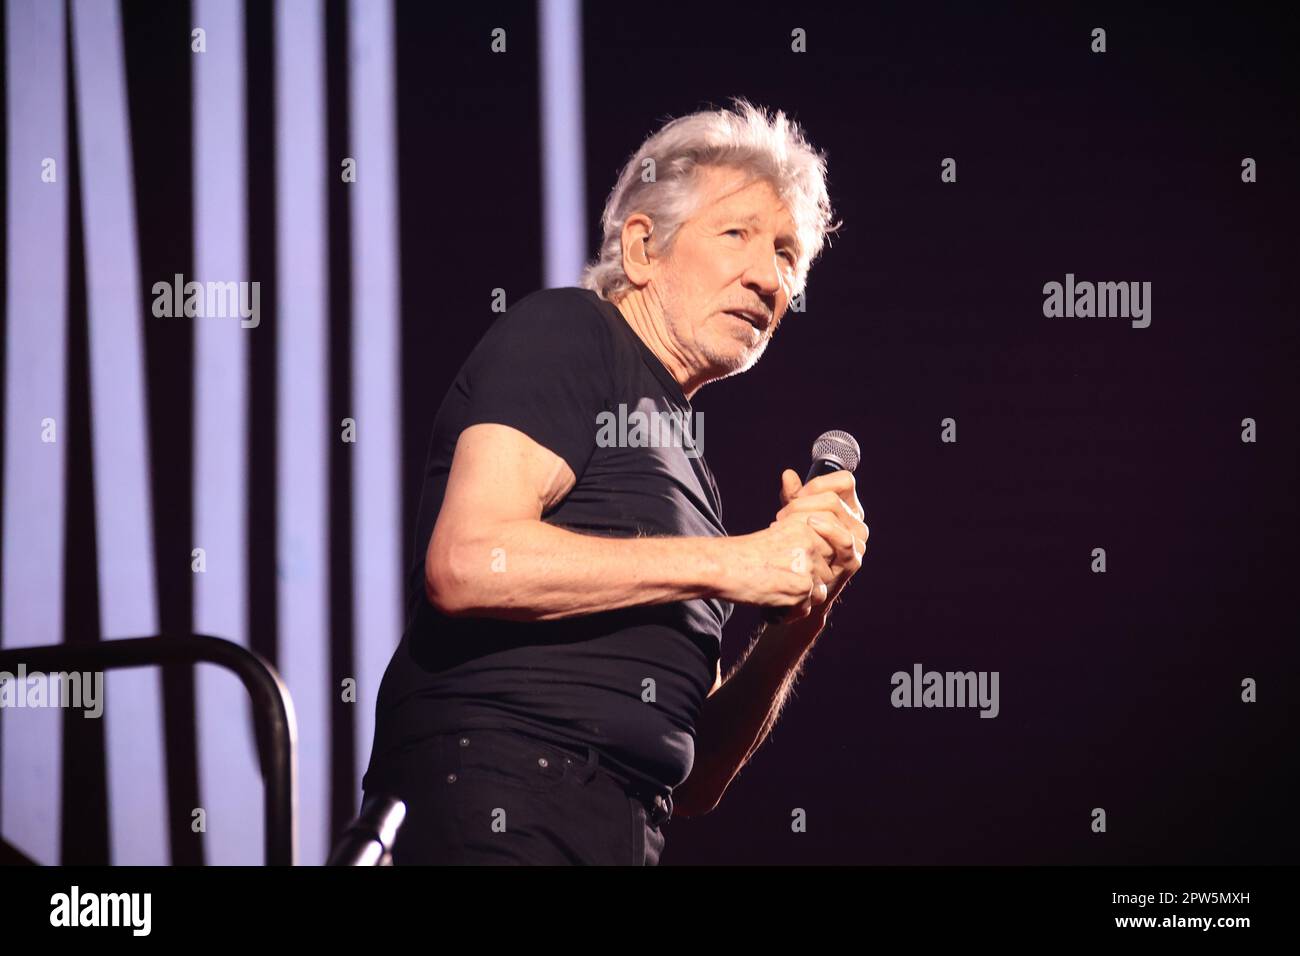 Bologna, Italy. 28th Apr, 2023. Roger Waters, bassist, songwriter and former member of the rock band Pink Floyd performing on stage in Bologna, April 28, 2023, Italy, during his european tour. Photo Michele Nucci Credit: Live Media Publishing Group/Alamy Live News Stock Photo